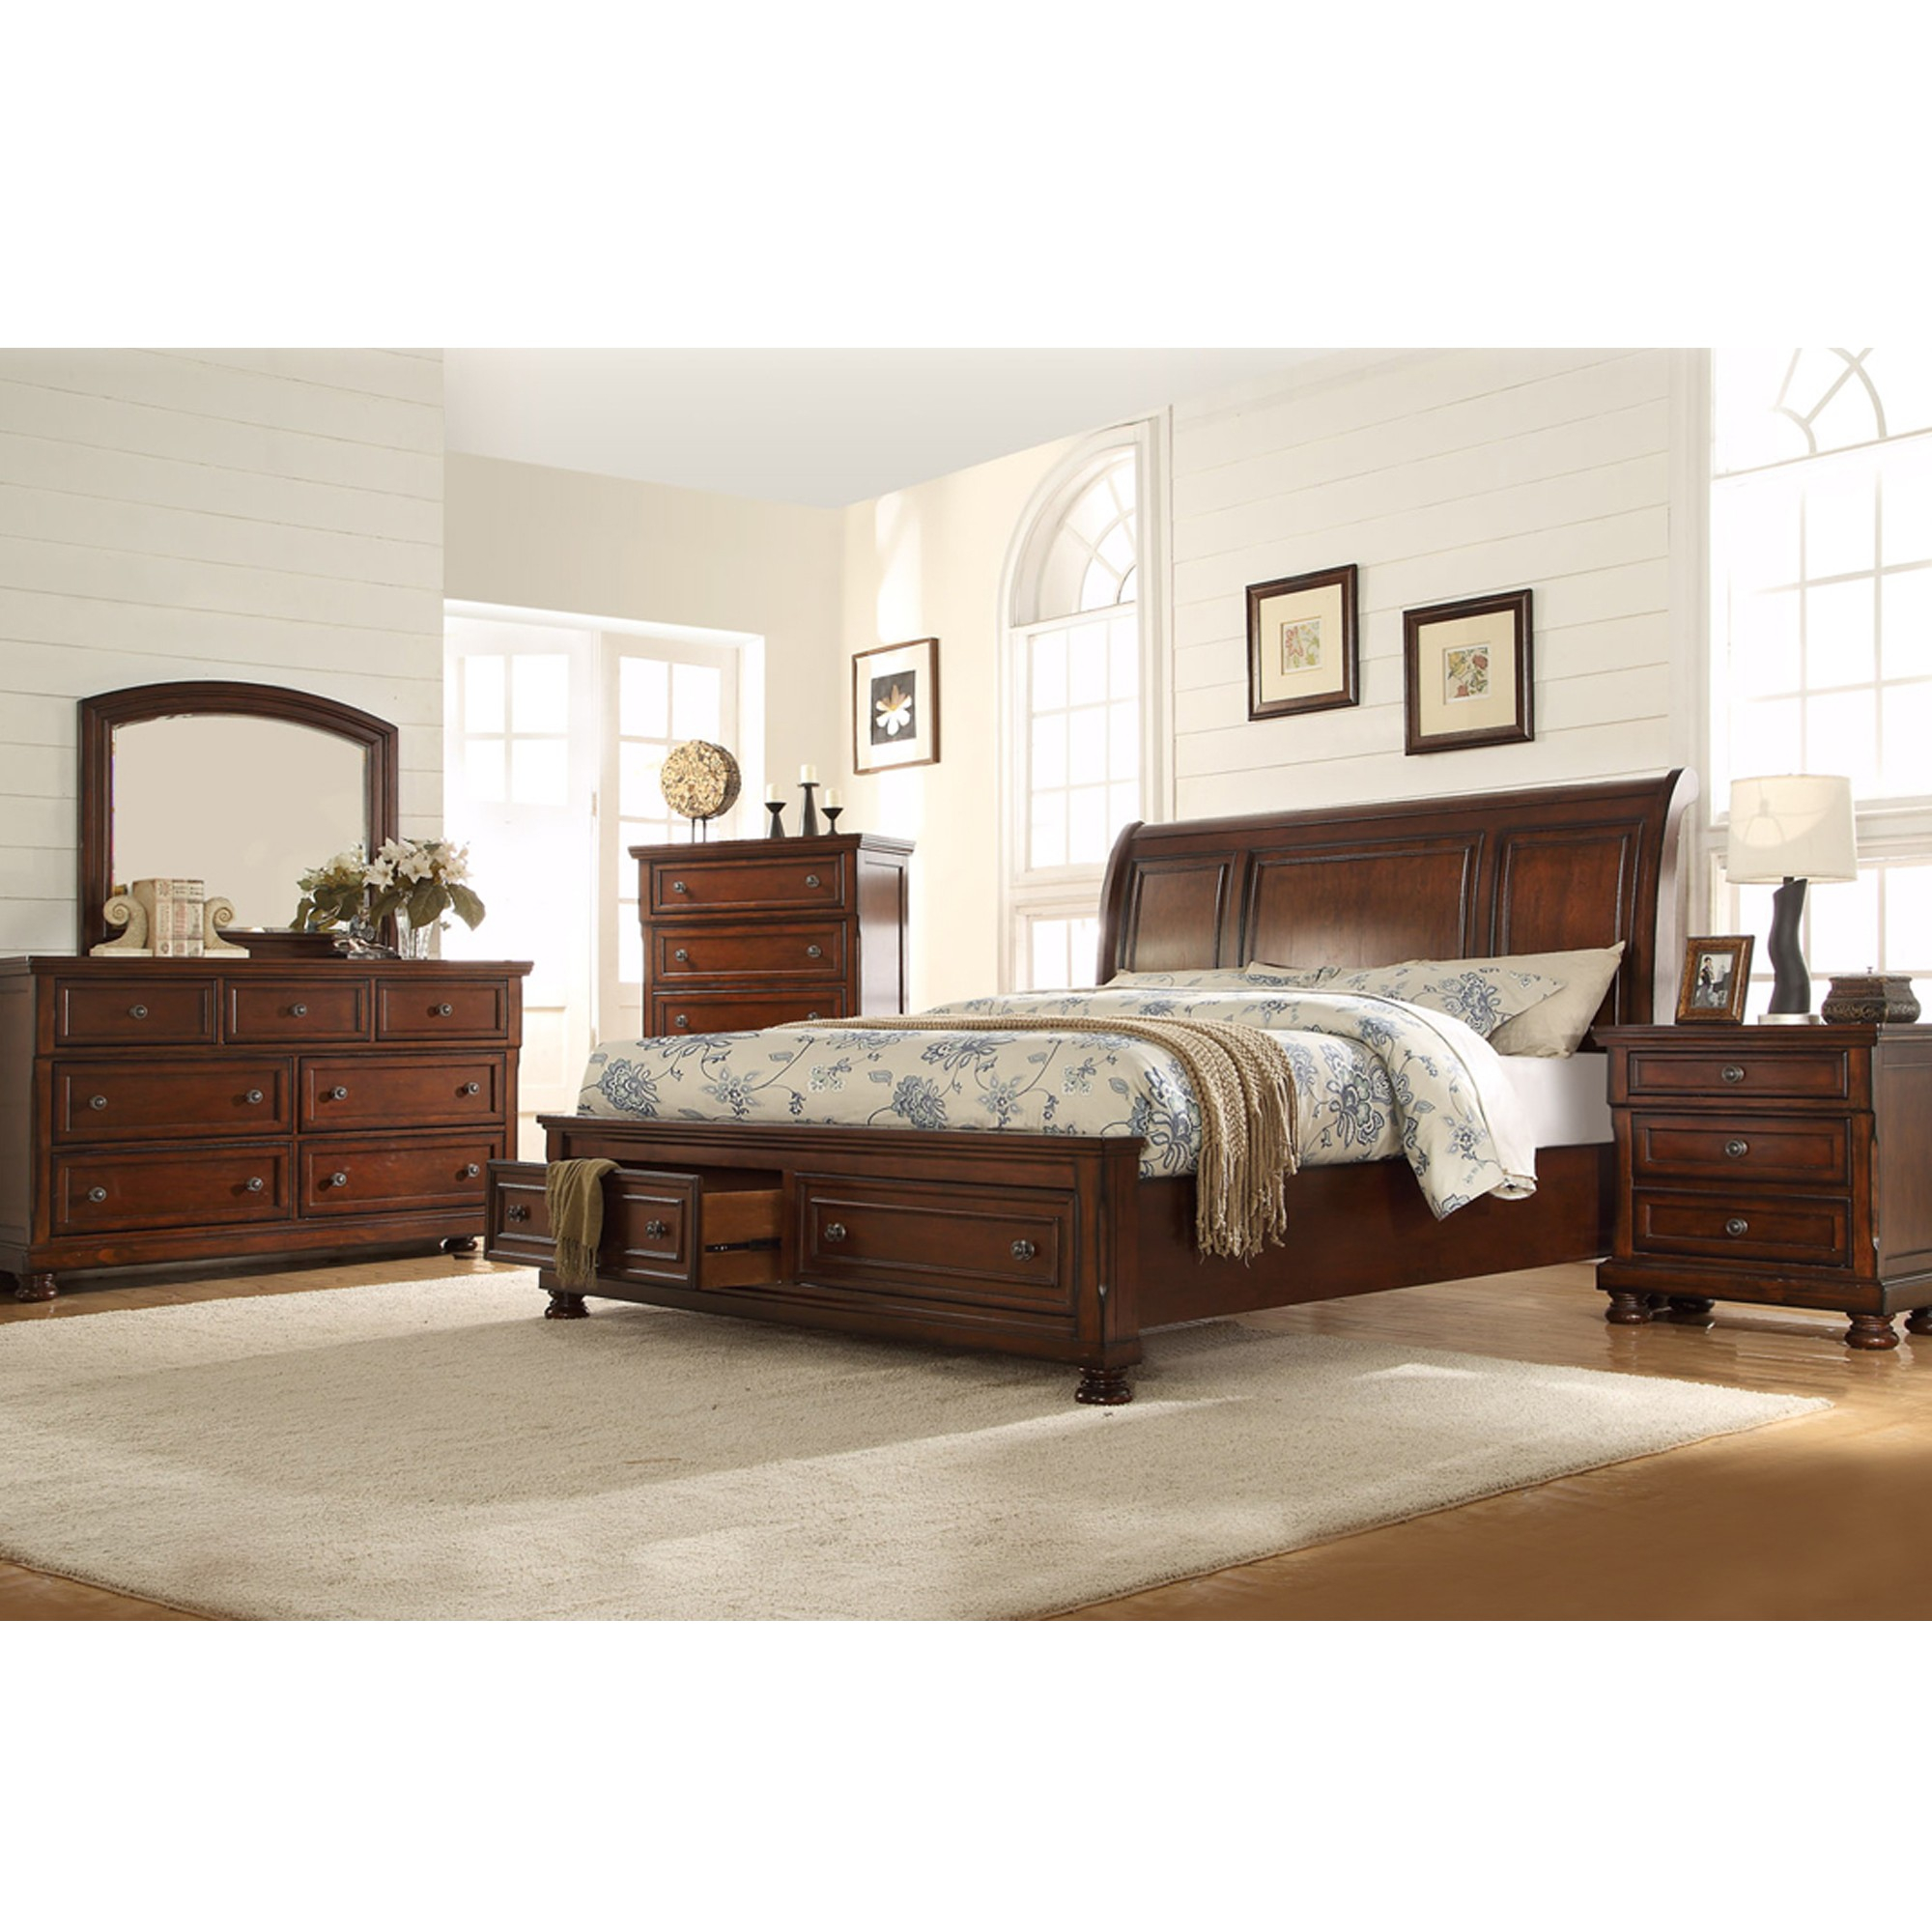 Chelsea King 6 Piece Bedroom pertaining to sizing 2000 X 2000